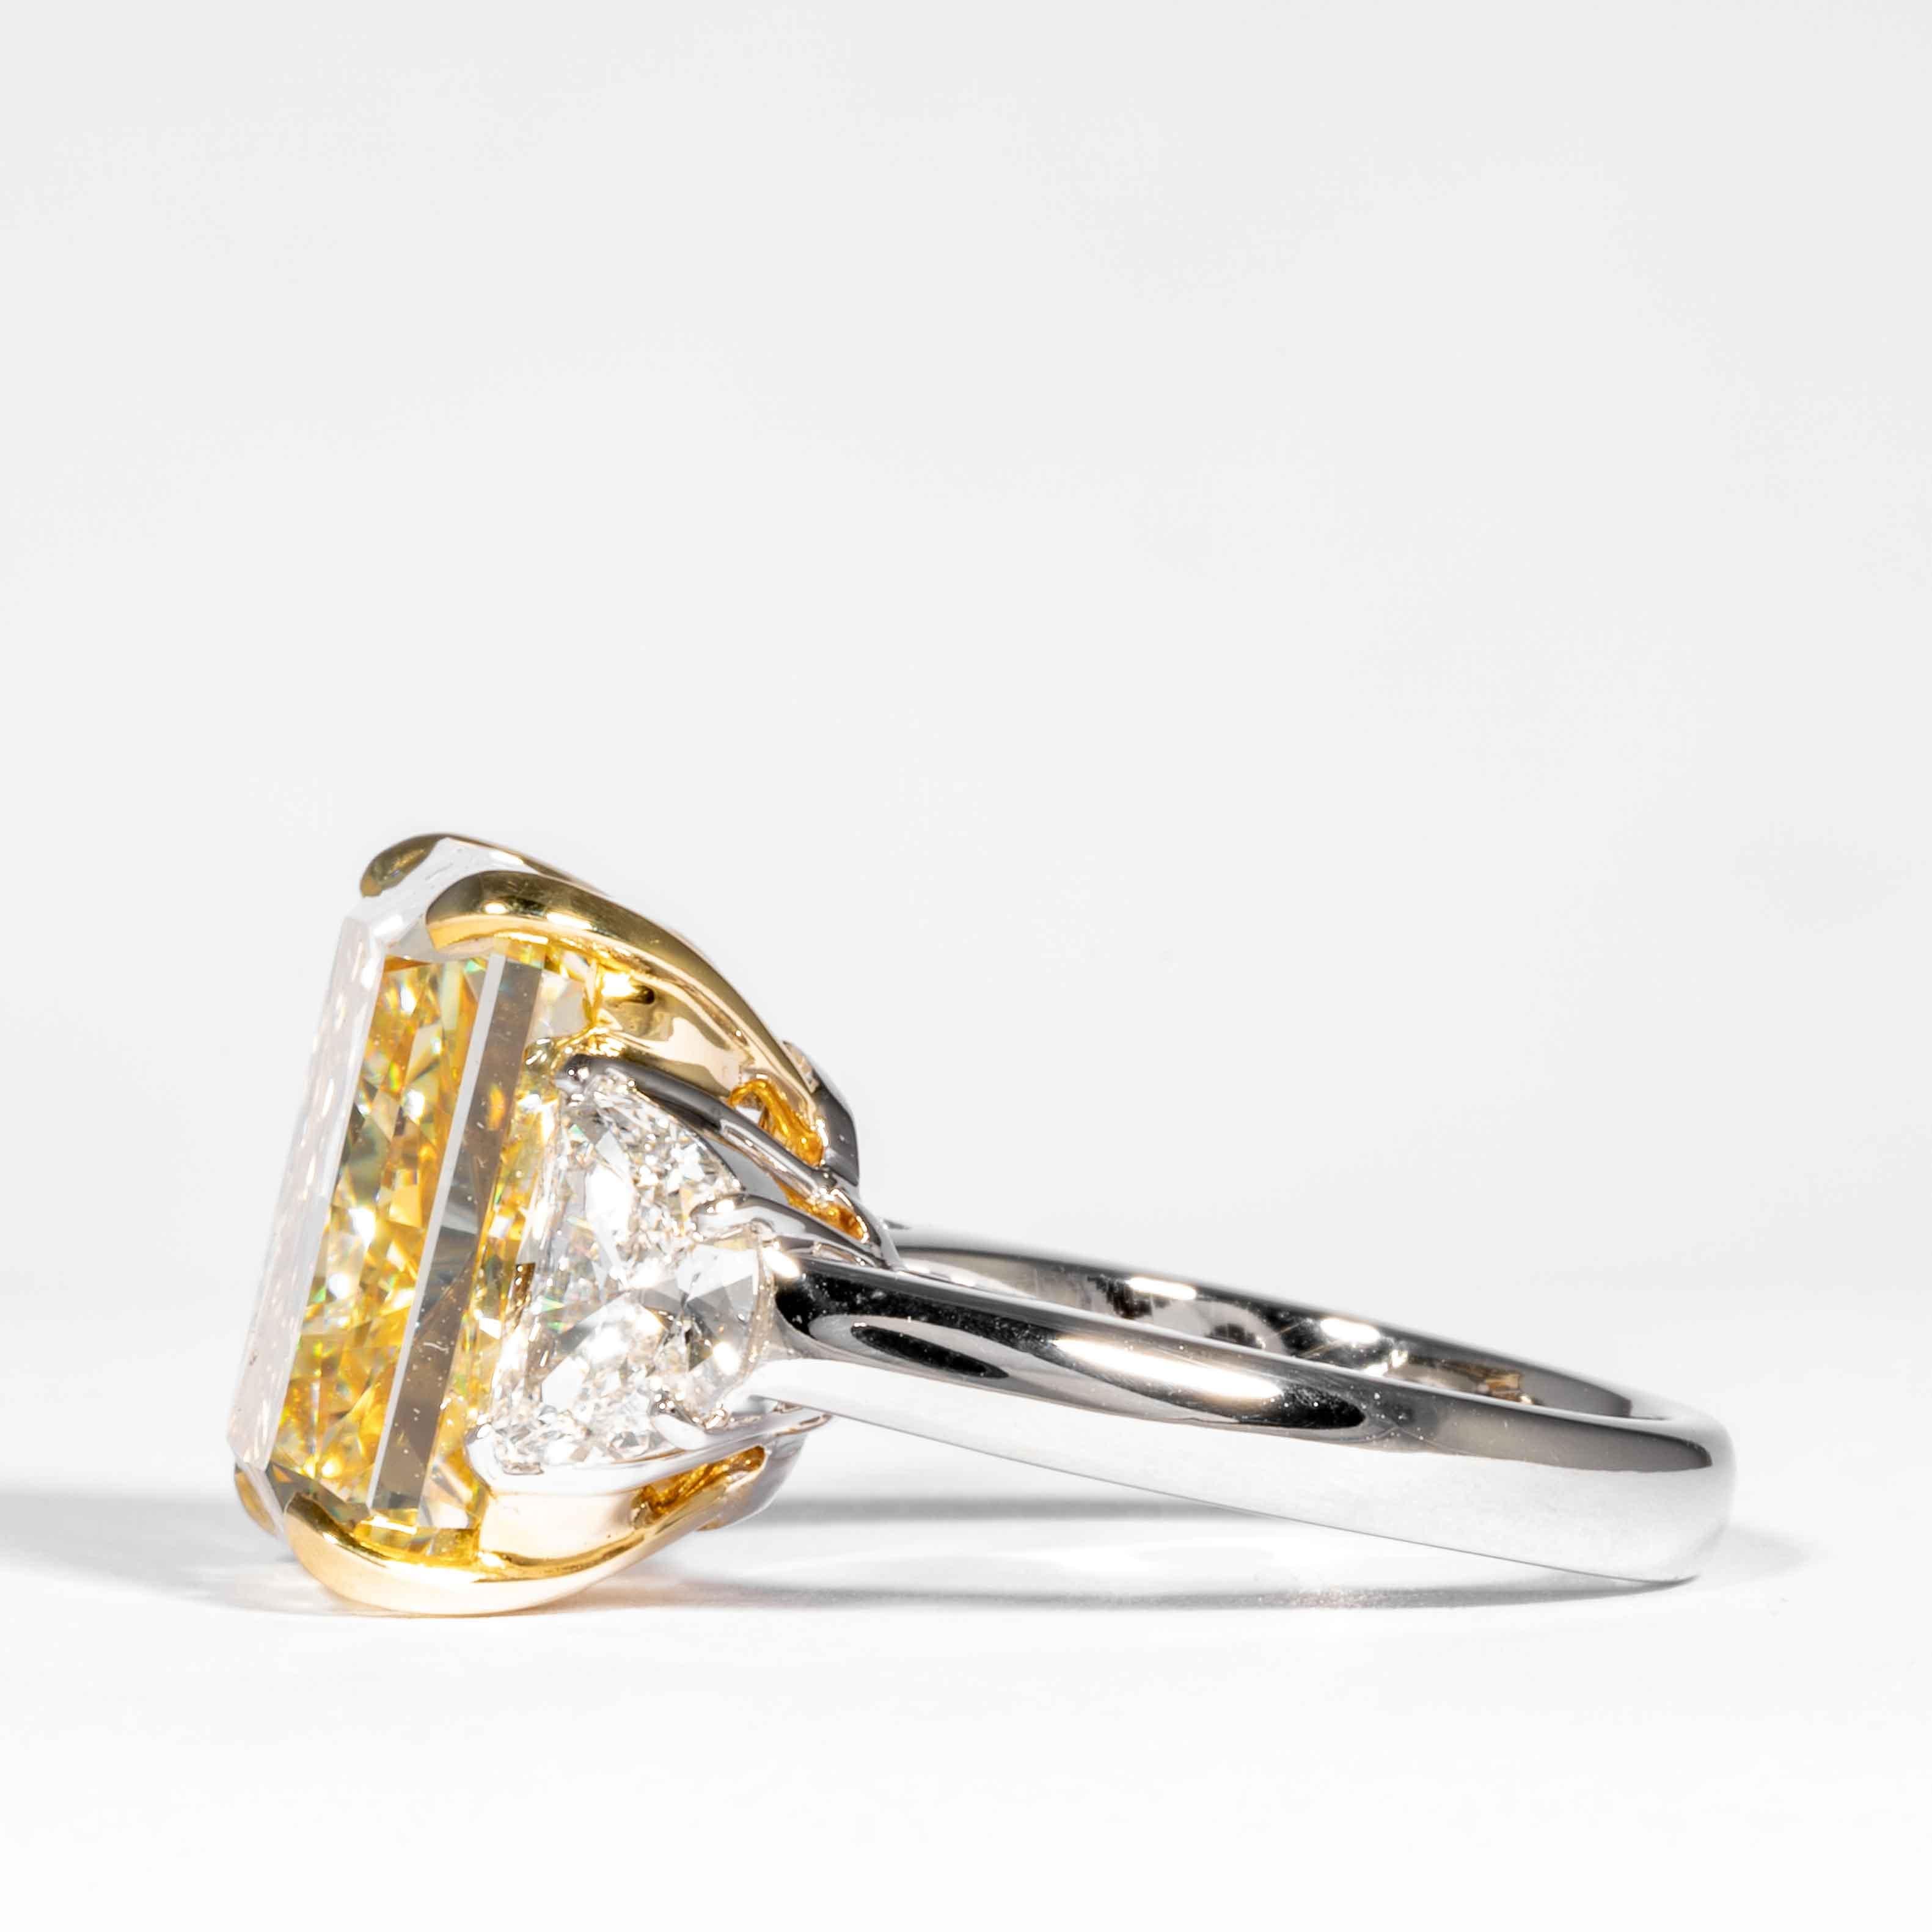 Shreve, Crump & Low GIA Certified 14.63 Carat Fancy Yellow Radiant Diamond Ring In New Condition For Sale In Boston, MA